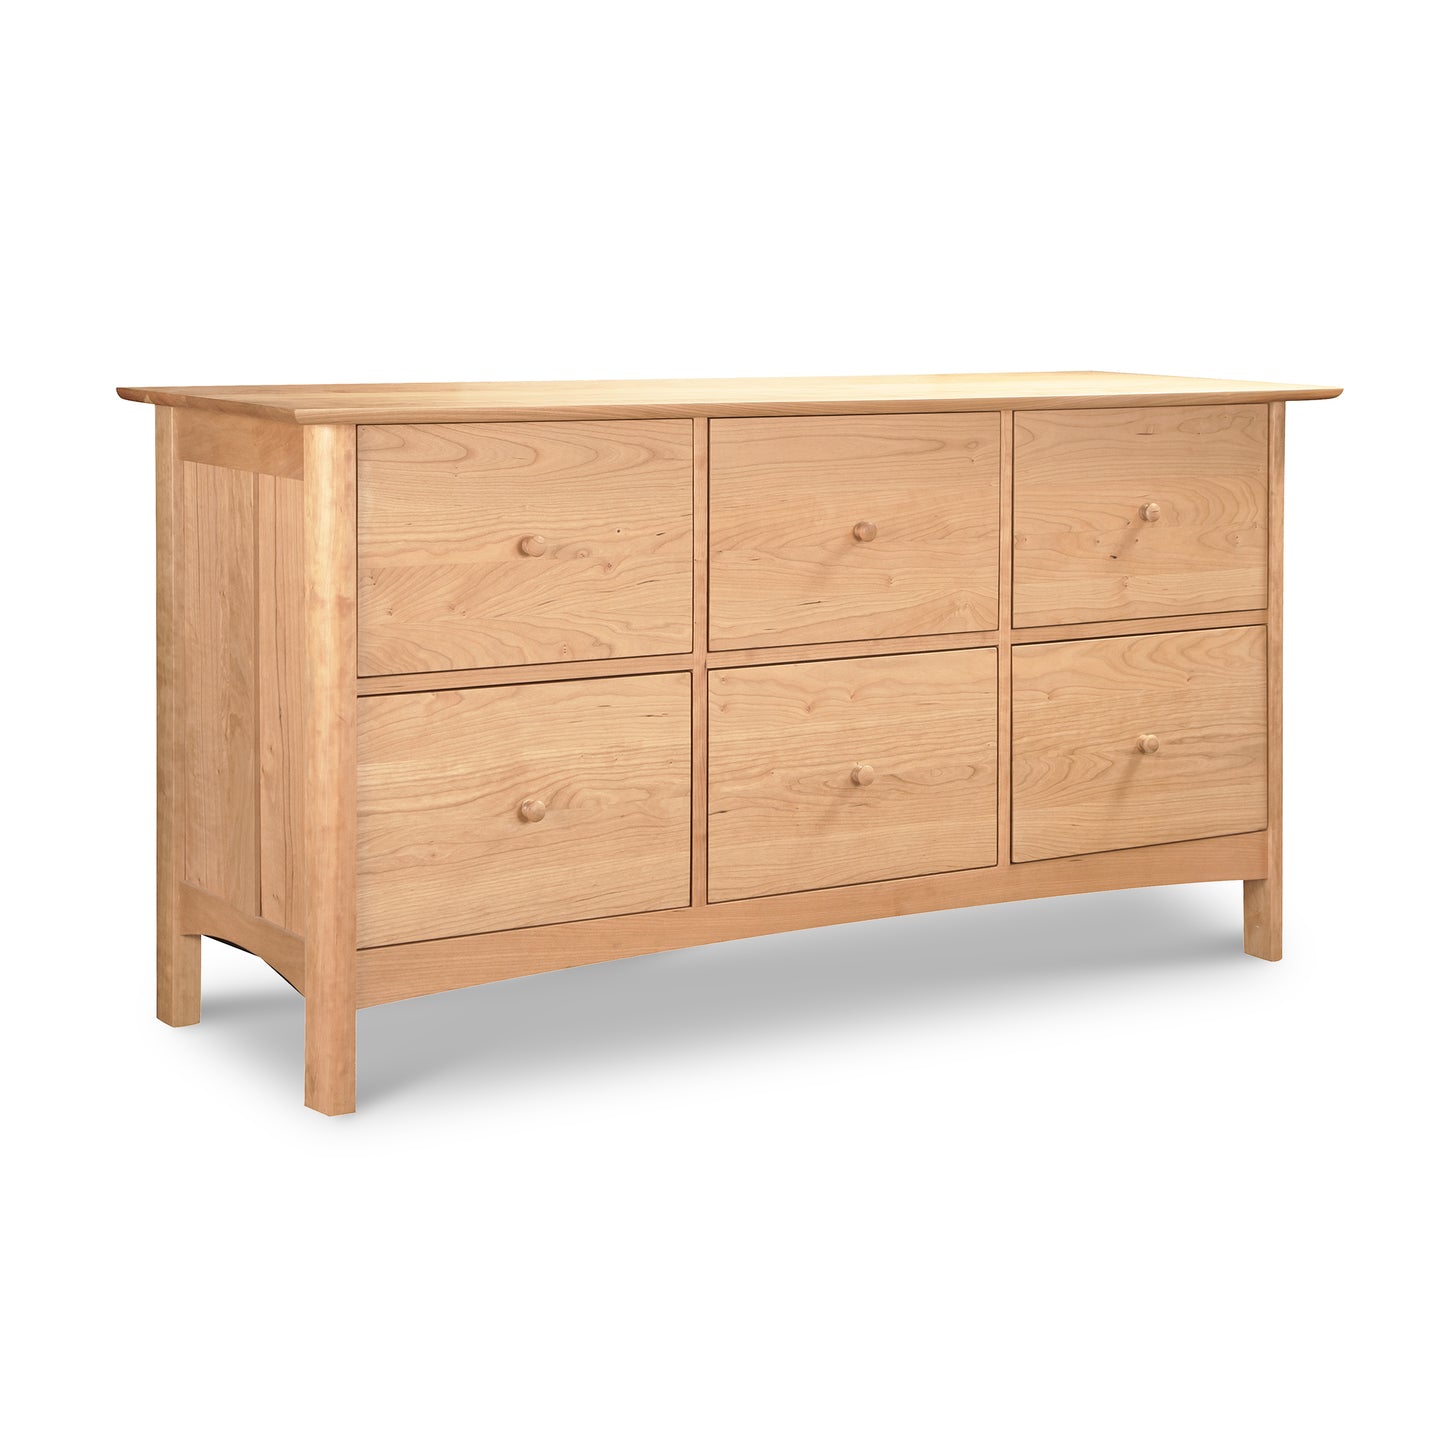 A Vermont Furniture Designs Heartwood Shaker 6-Drawer Legal File Cabinet on a white background.